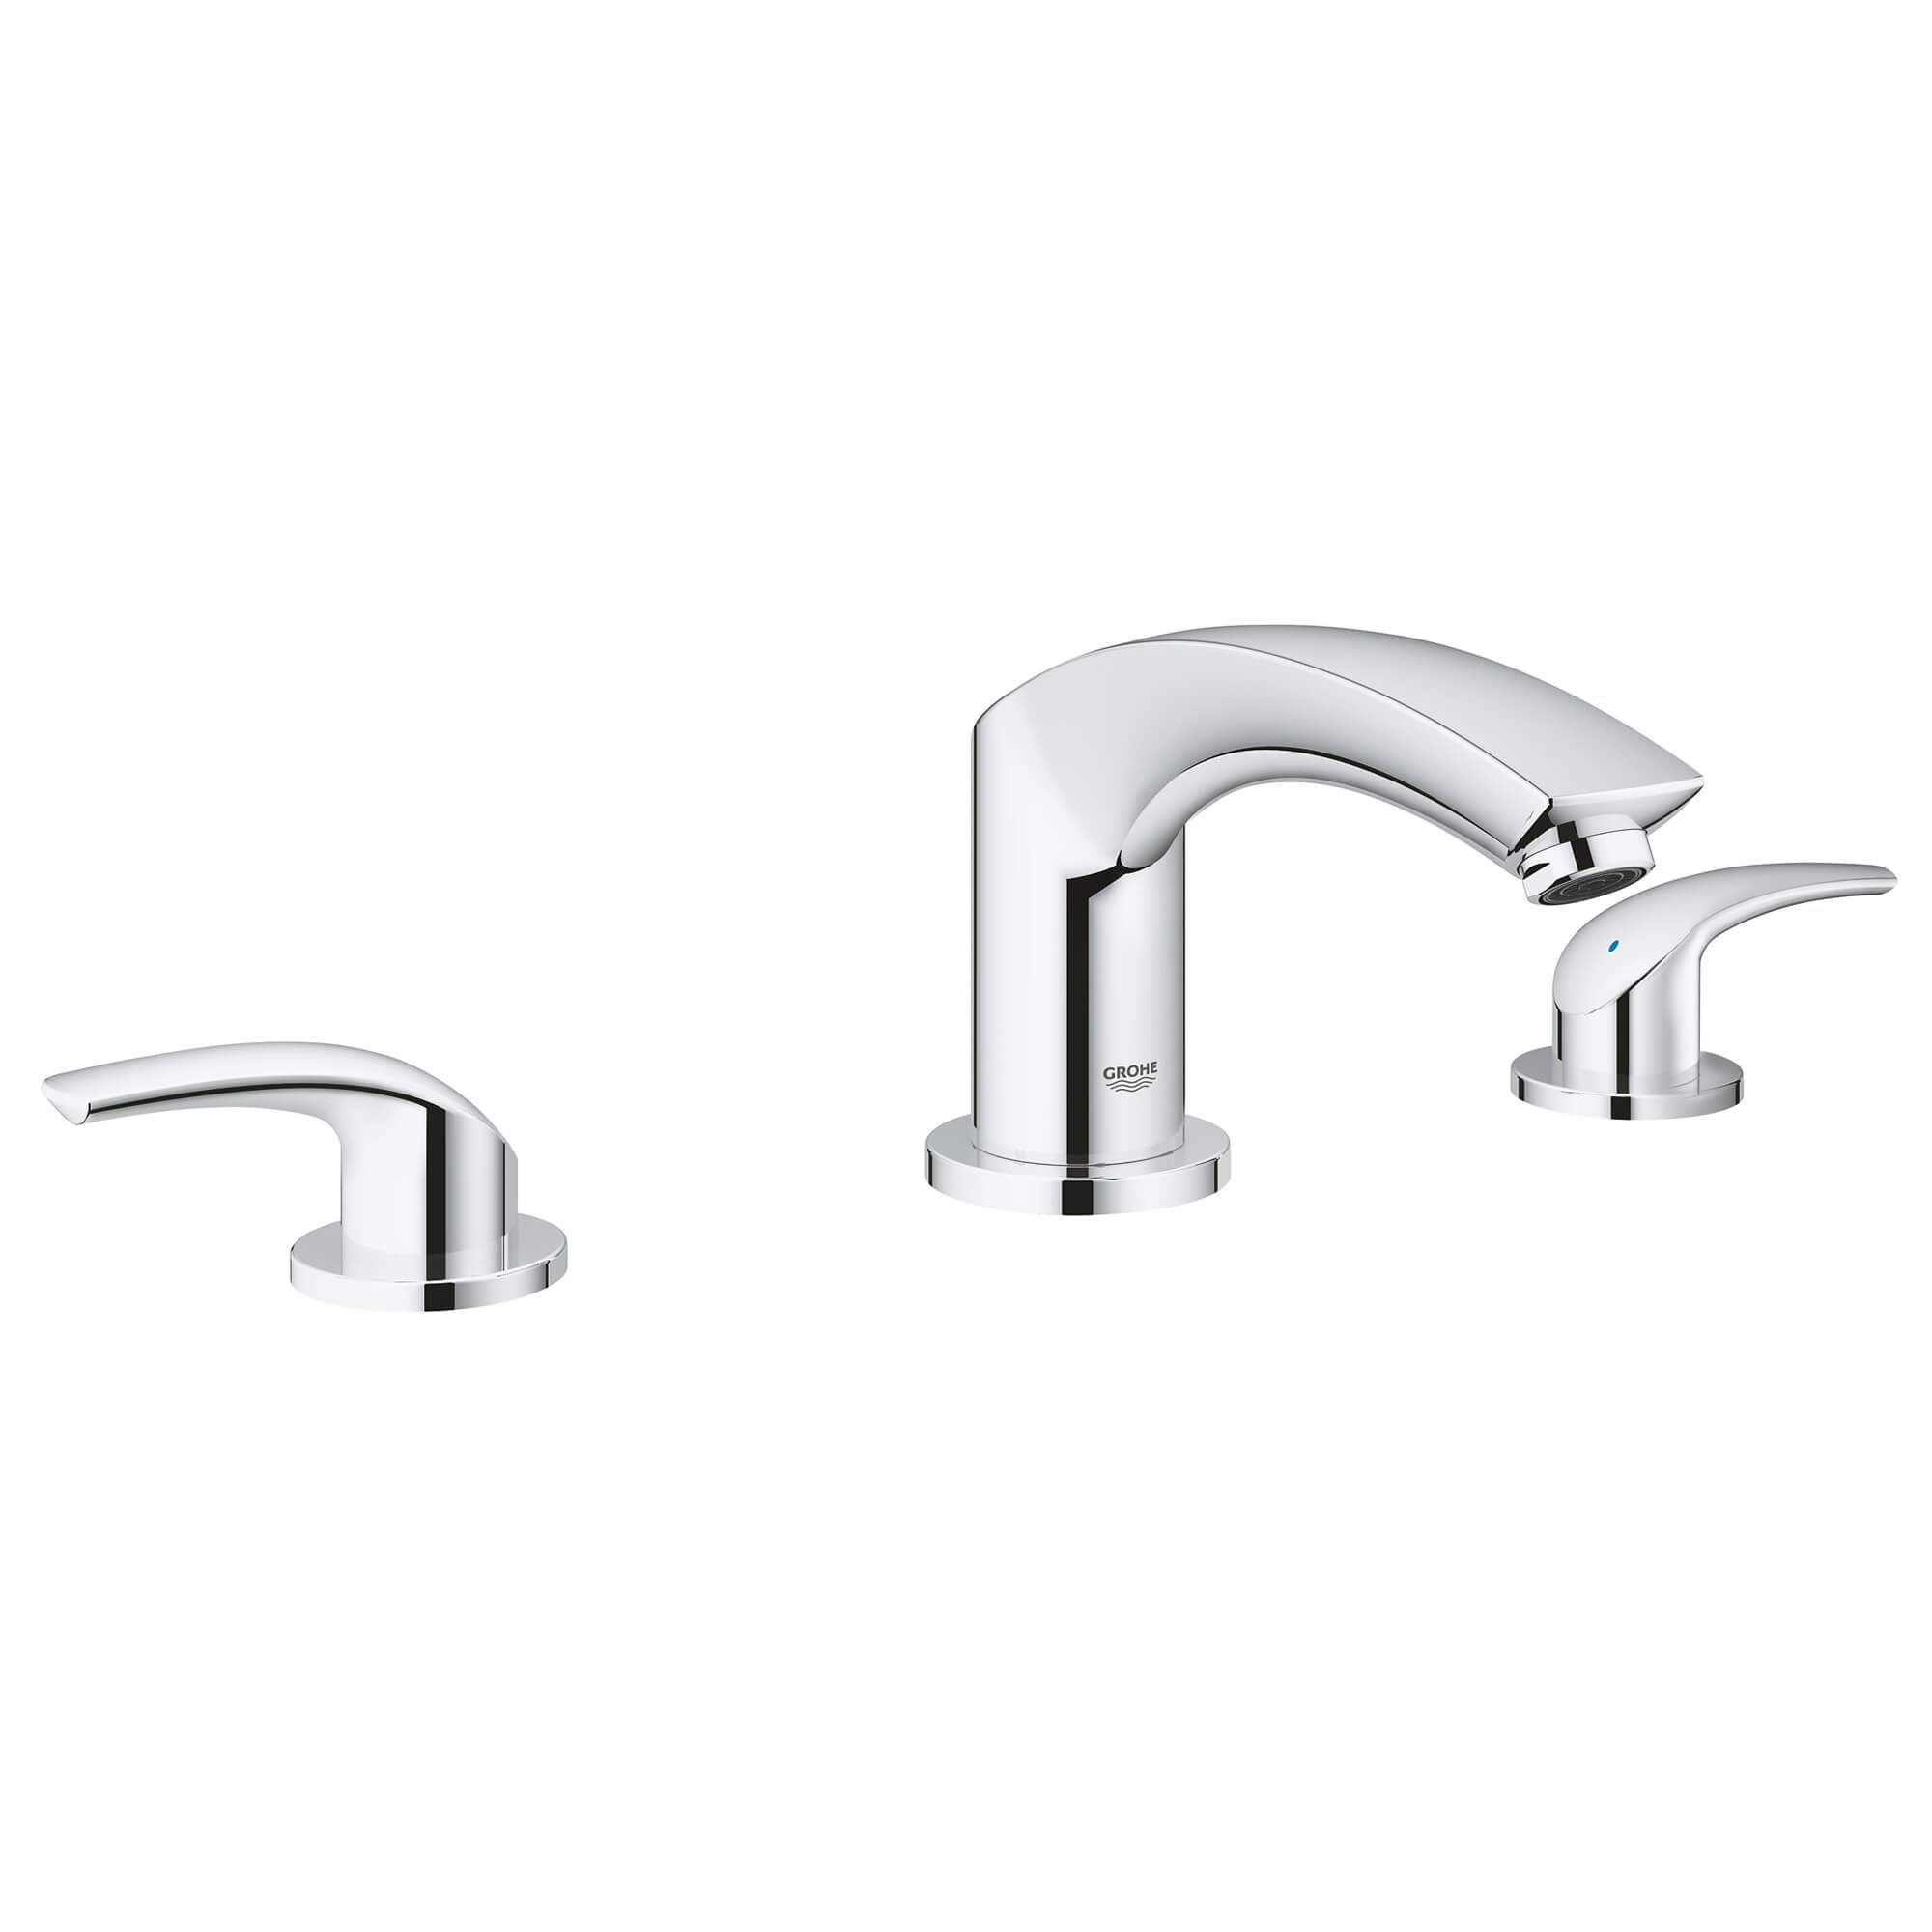 Grohe Eurosmart 46903000 mixer lever Plaque Shower and Tub Shower 46903 